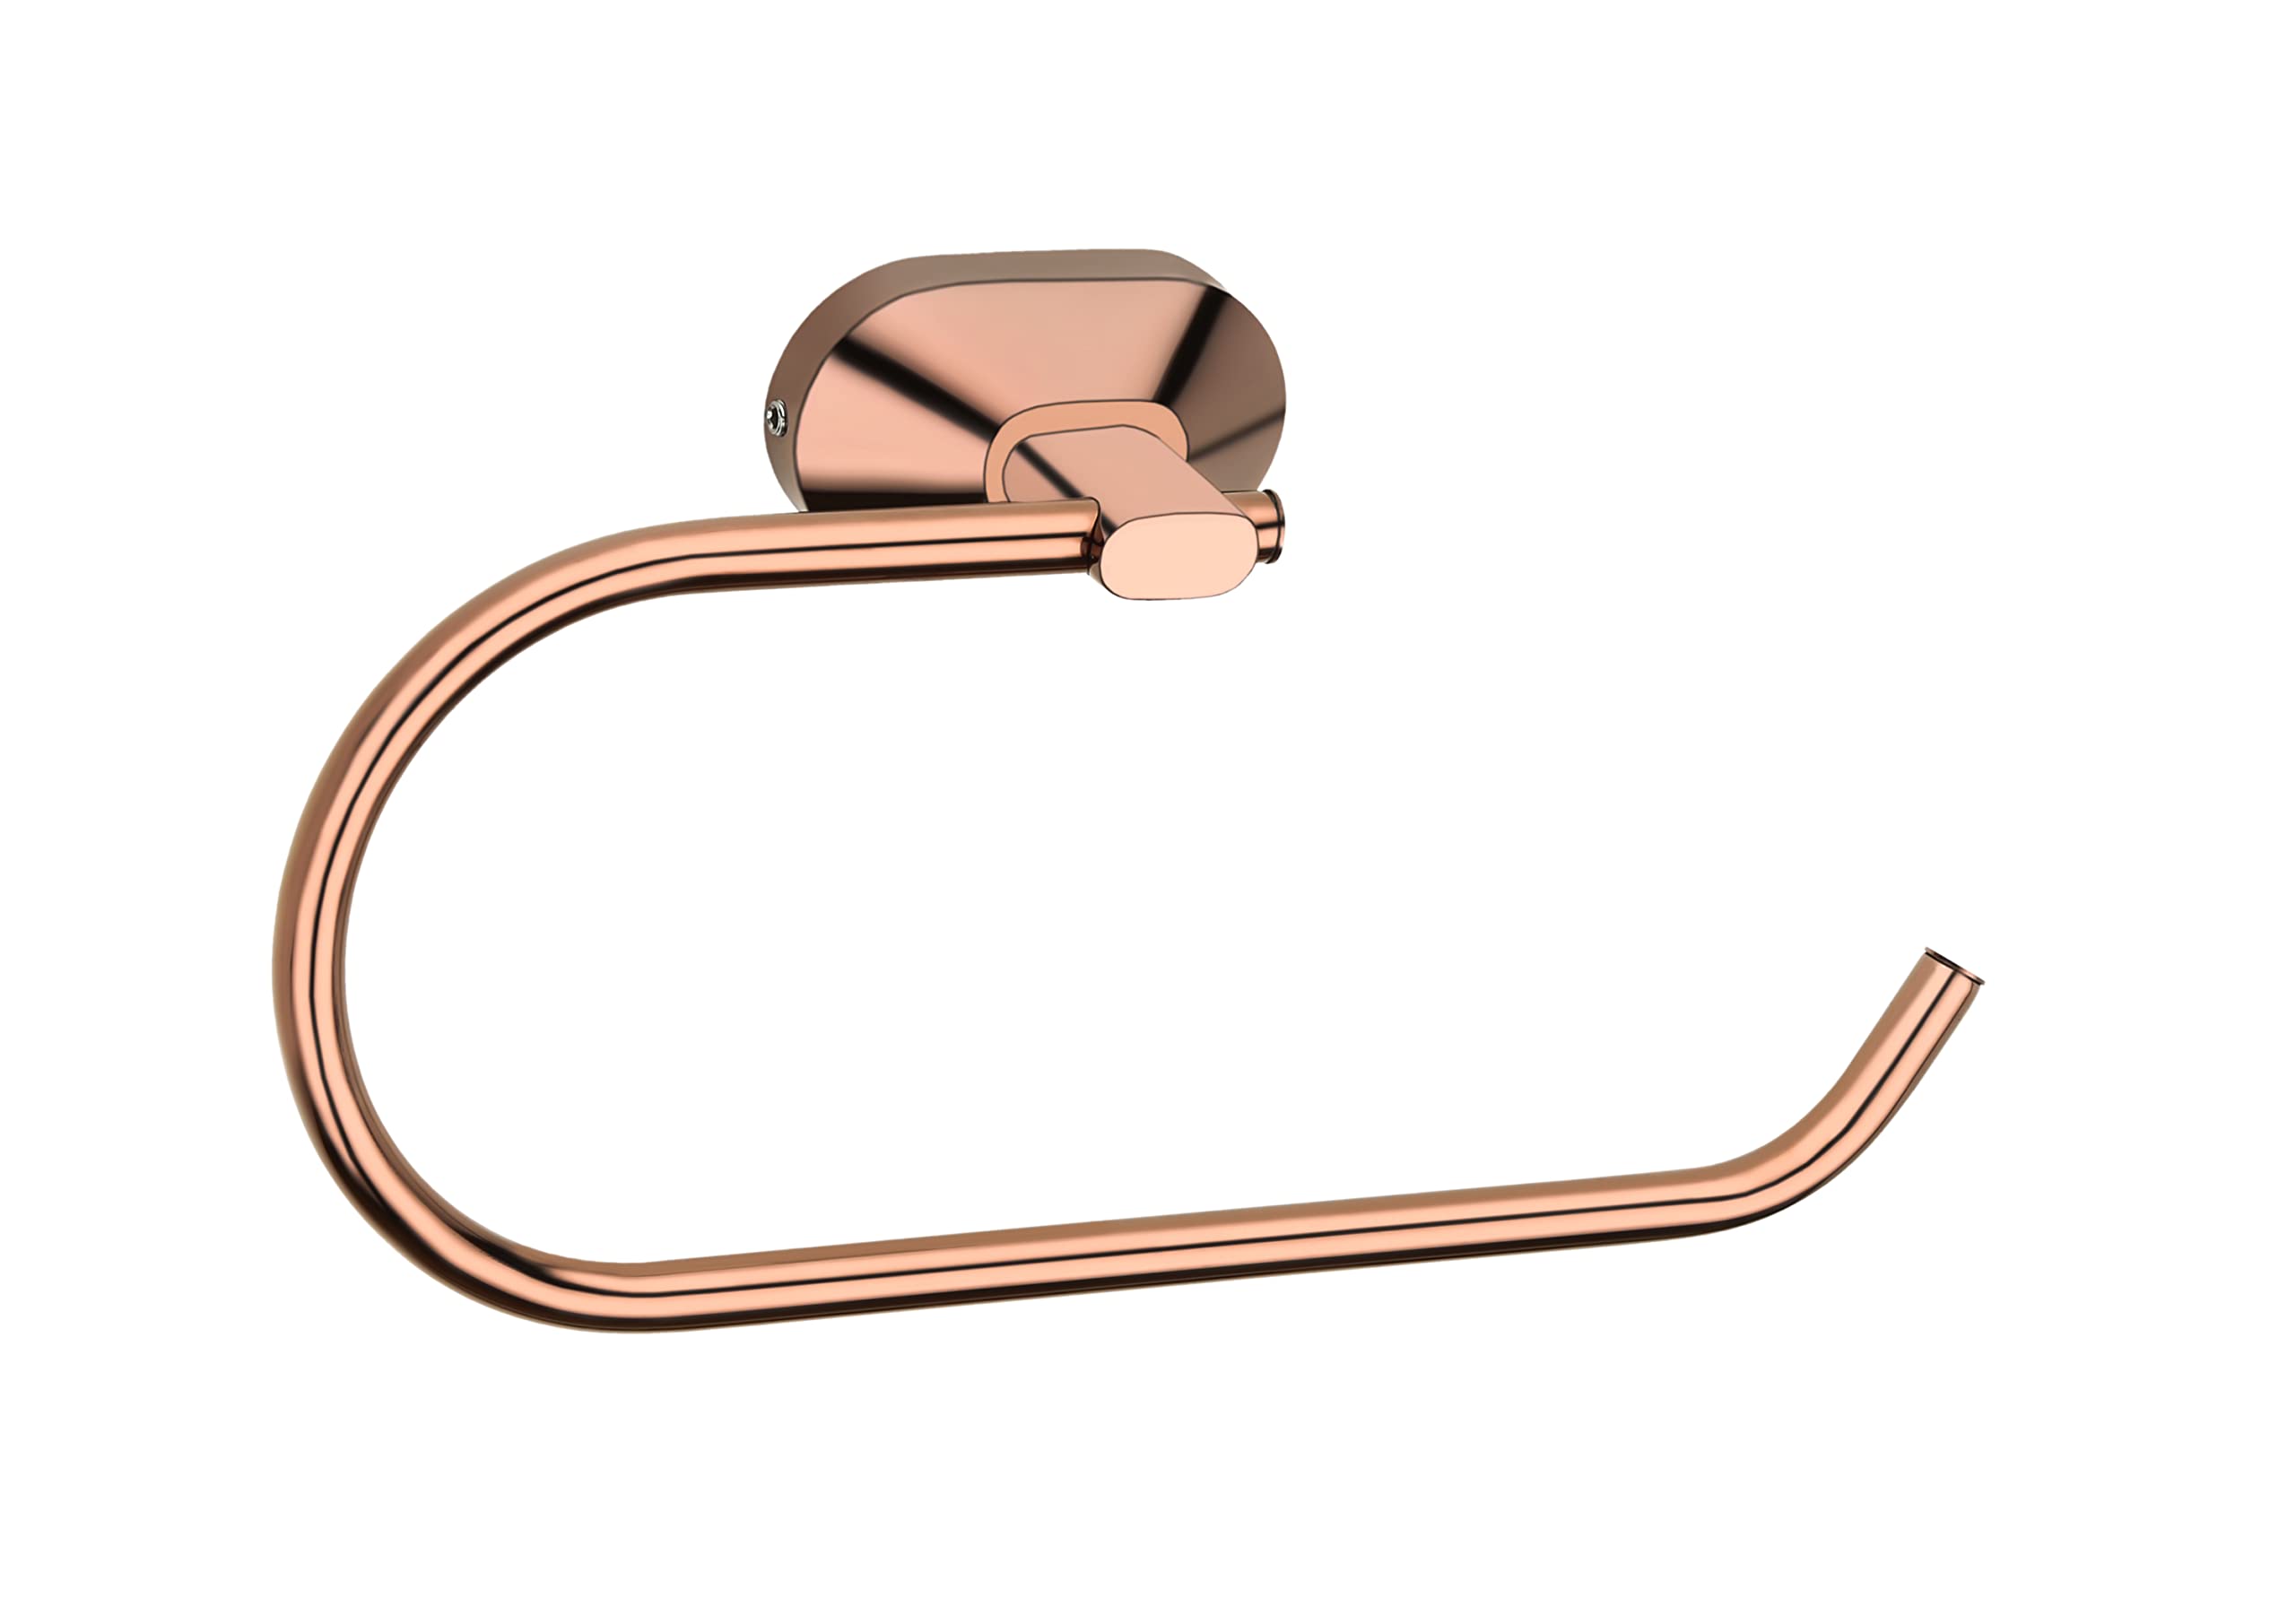 Aquieen Cuff Wall Mounted Towel Ring for Hand Towel (Grade AISI SS 304) (Rose Gold)